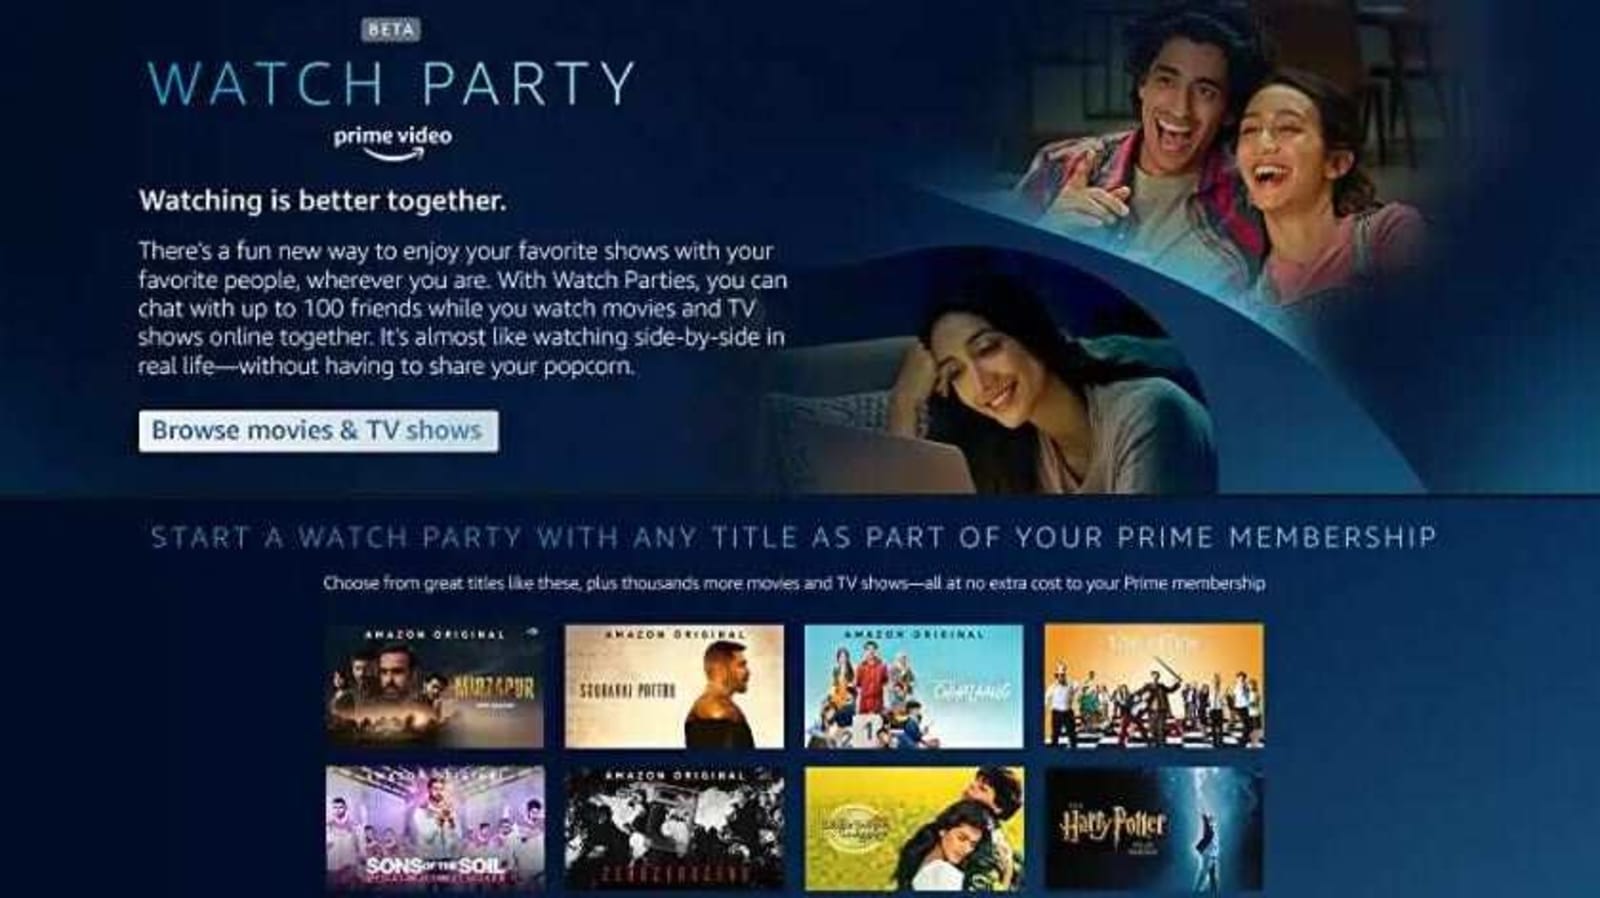 Prime Video Finally Launches 'Watch Party' Feature In India